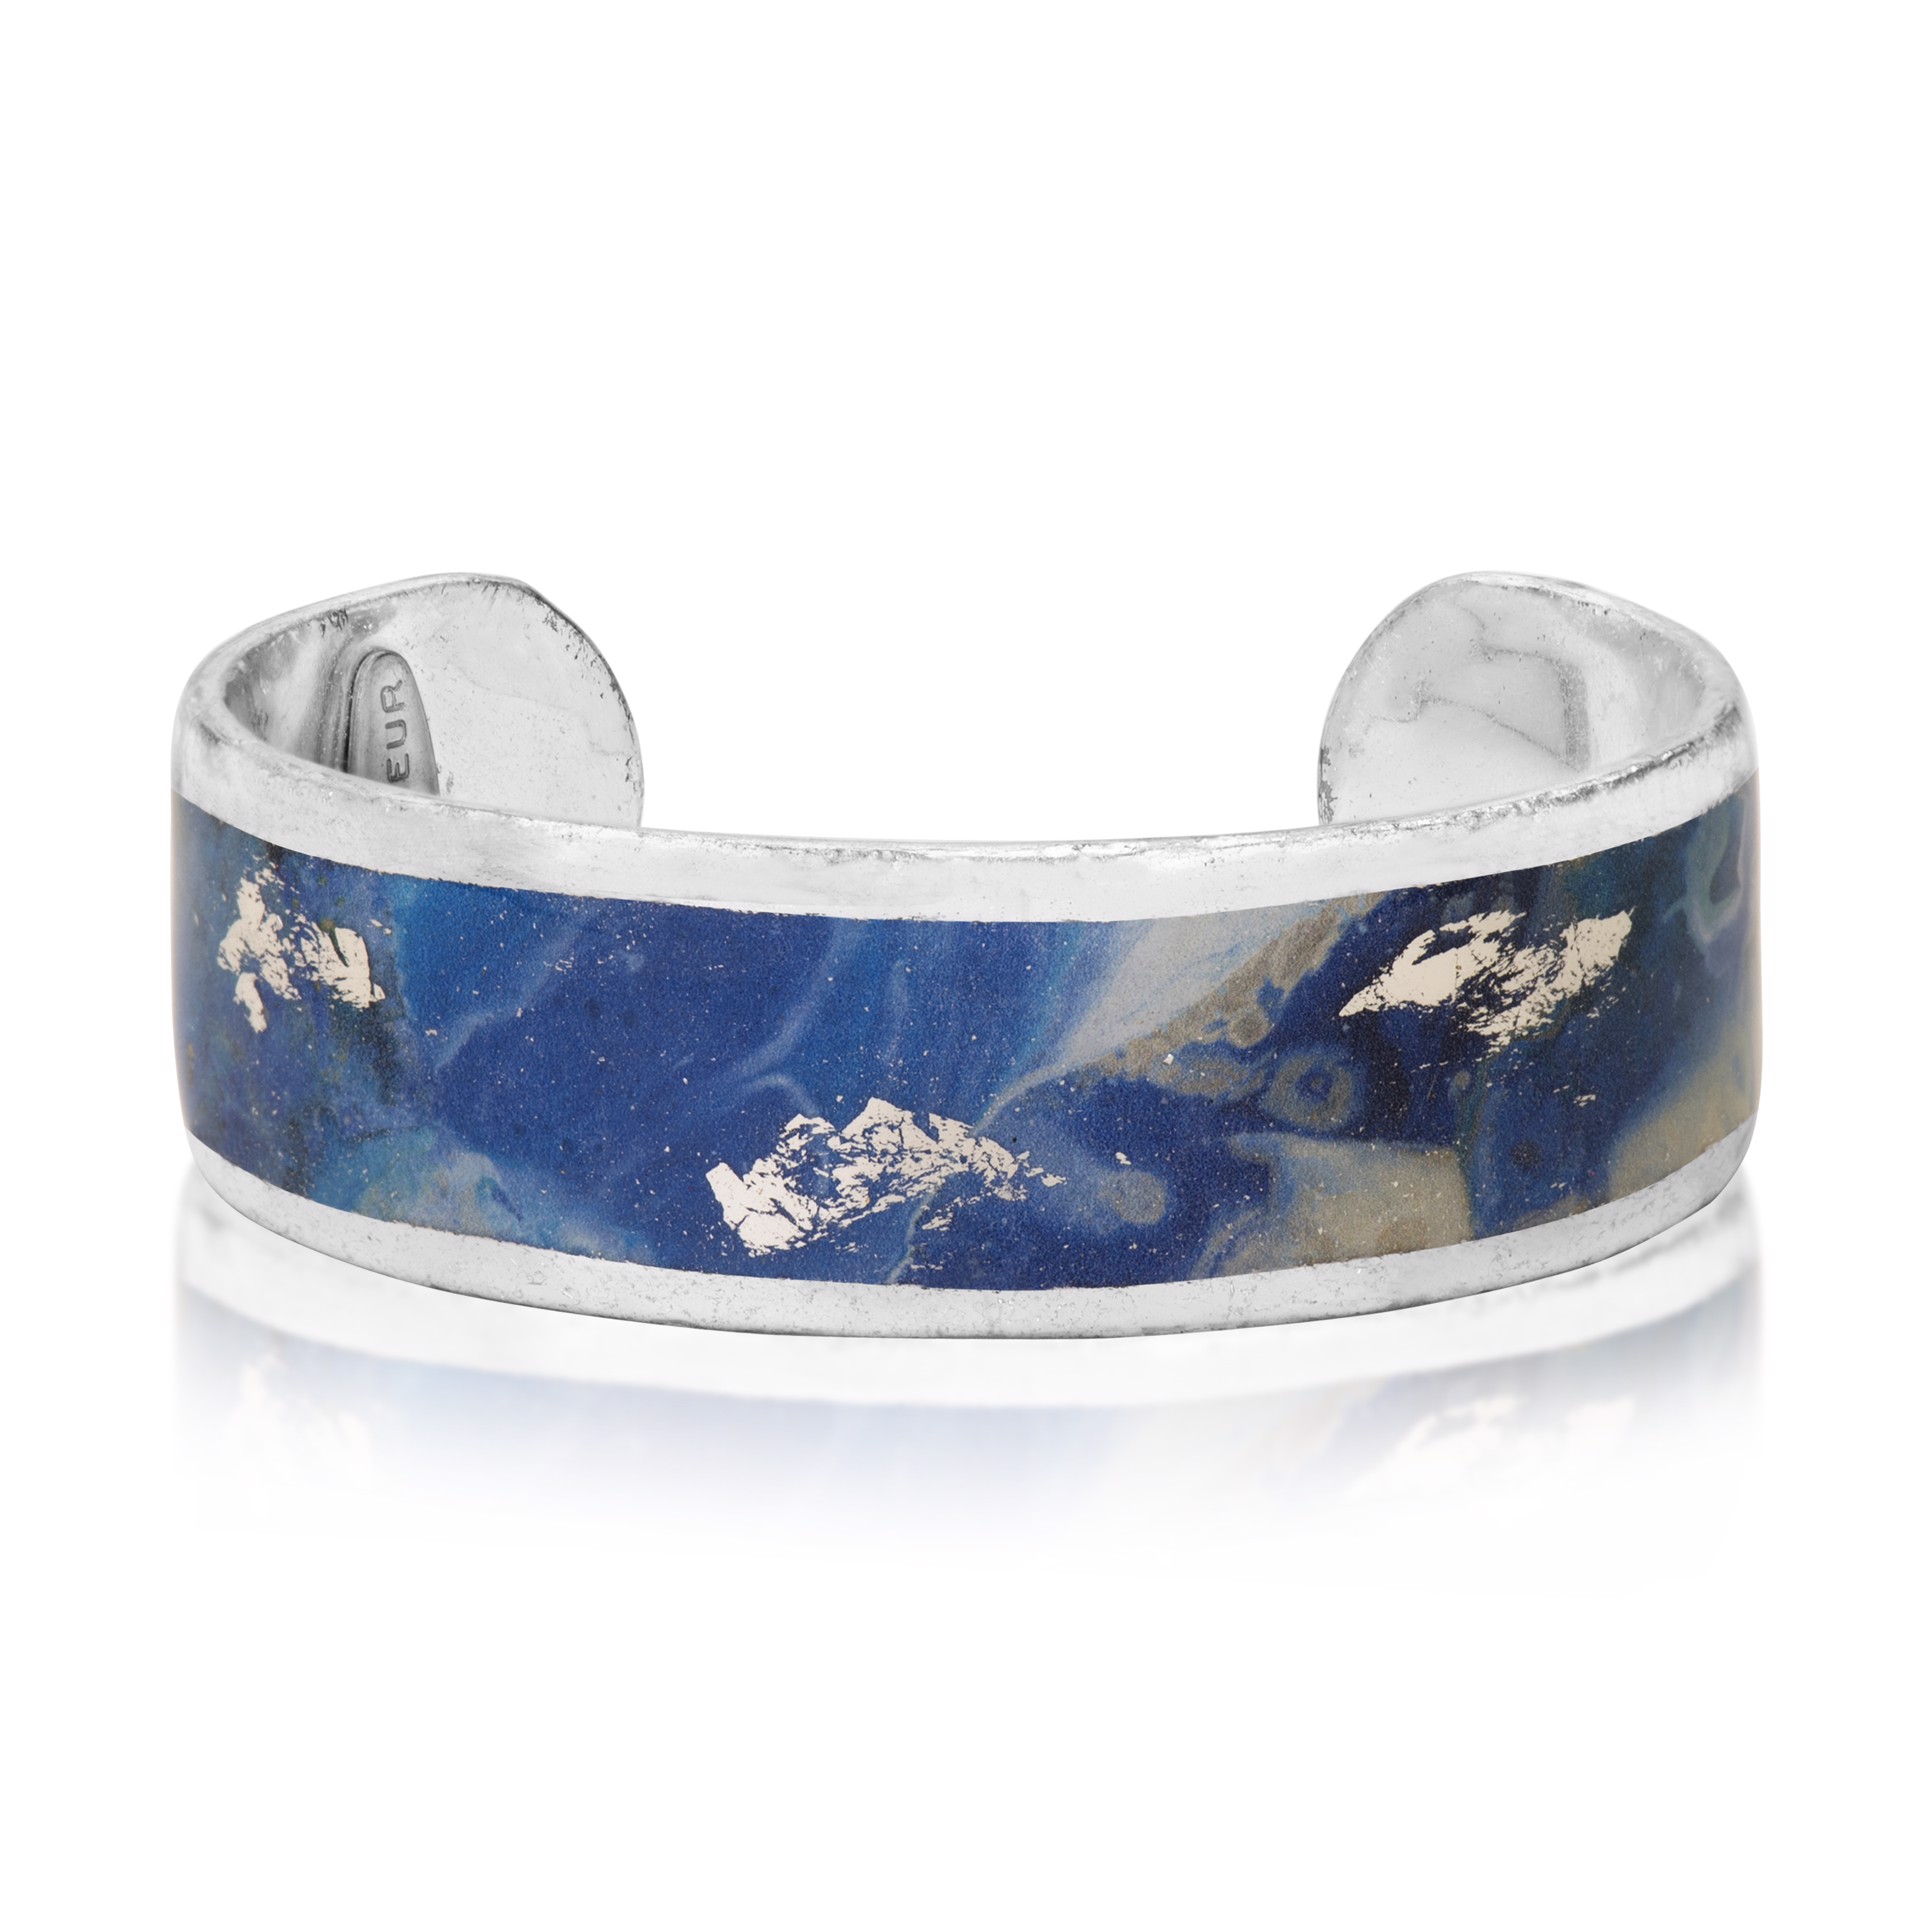 Cast Yourself on Every Wave Cuff, .75" Silver by Evocateur